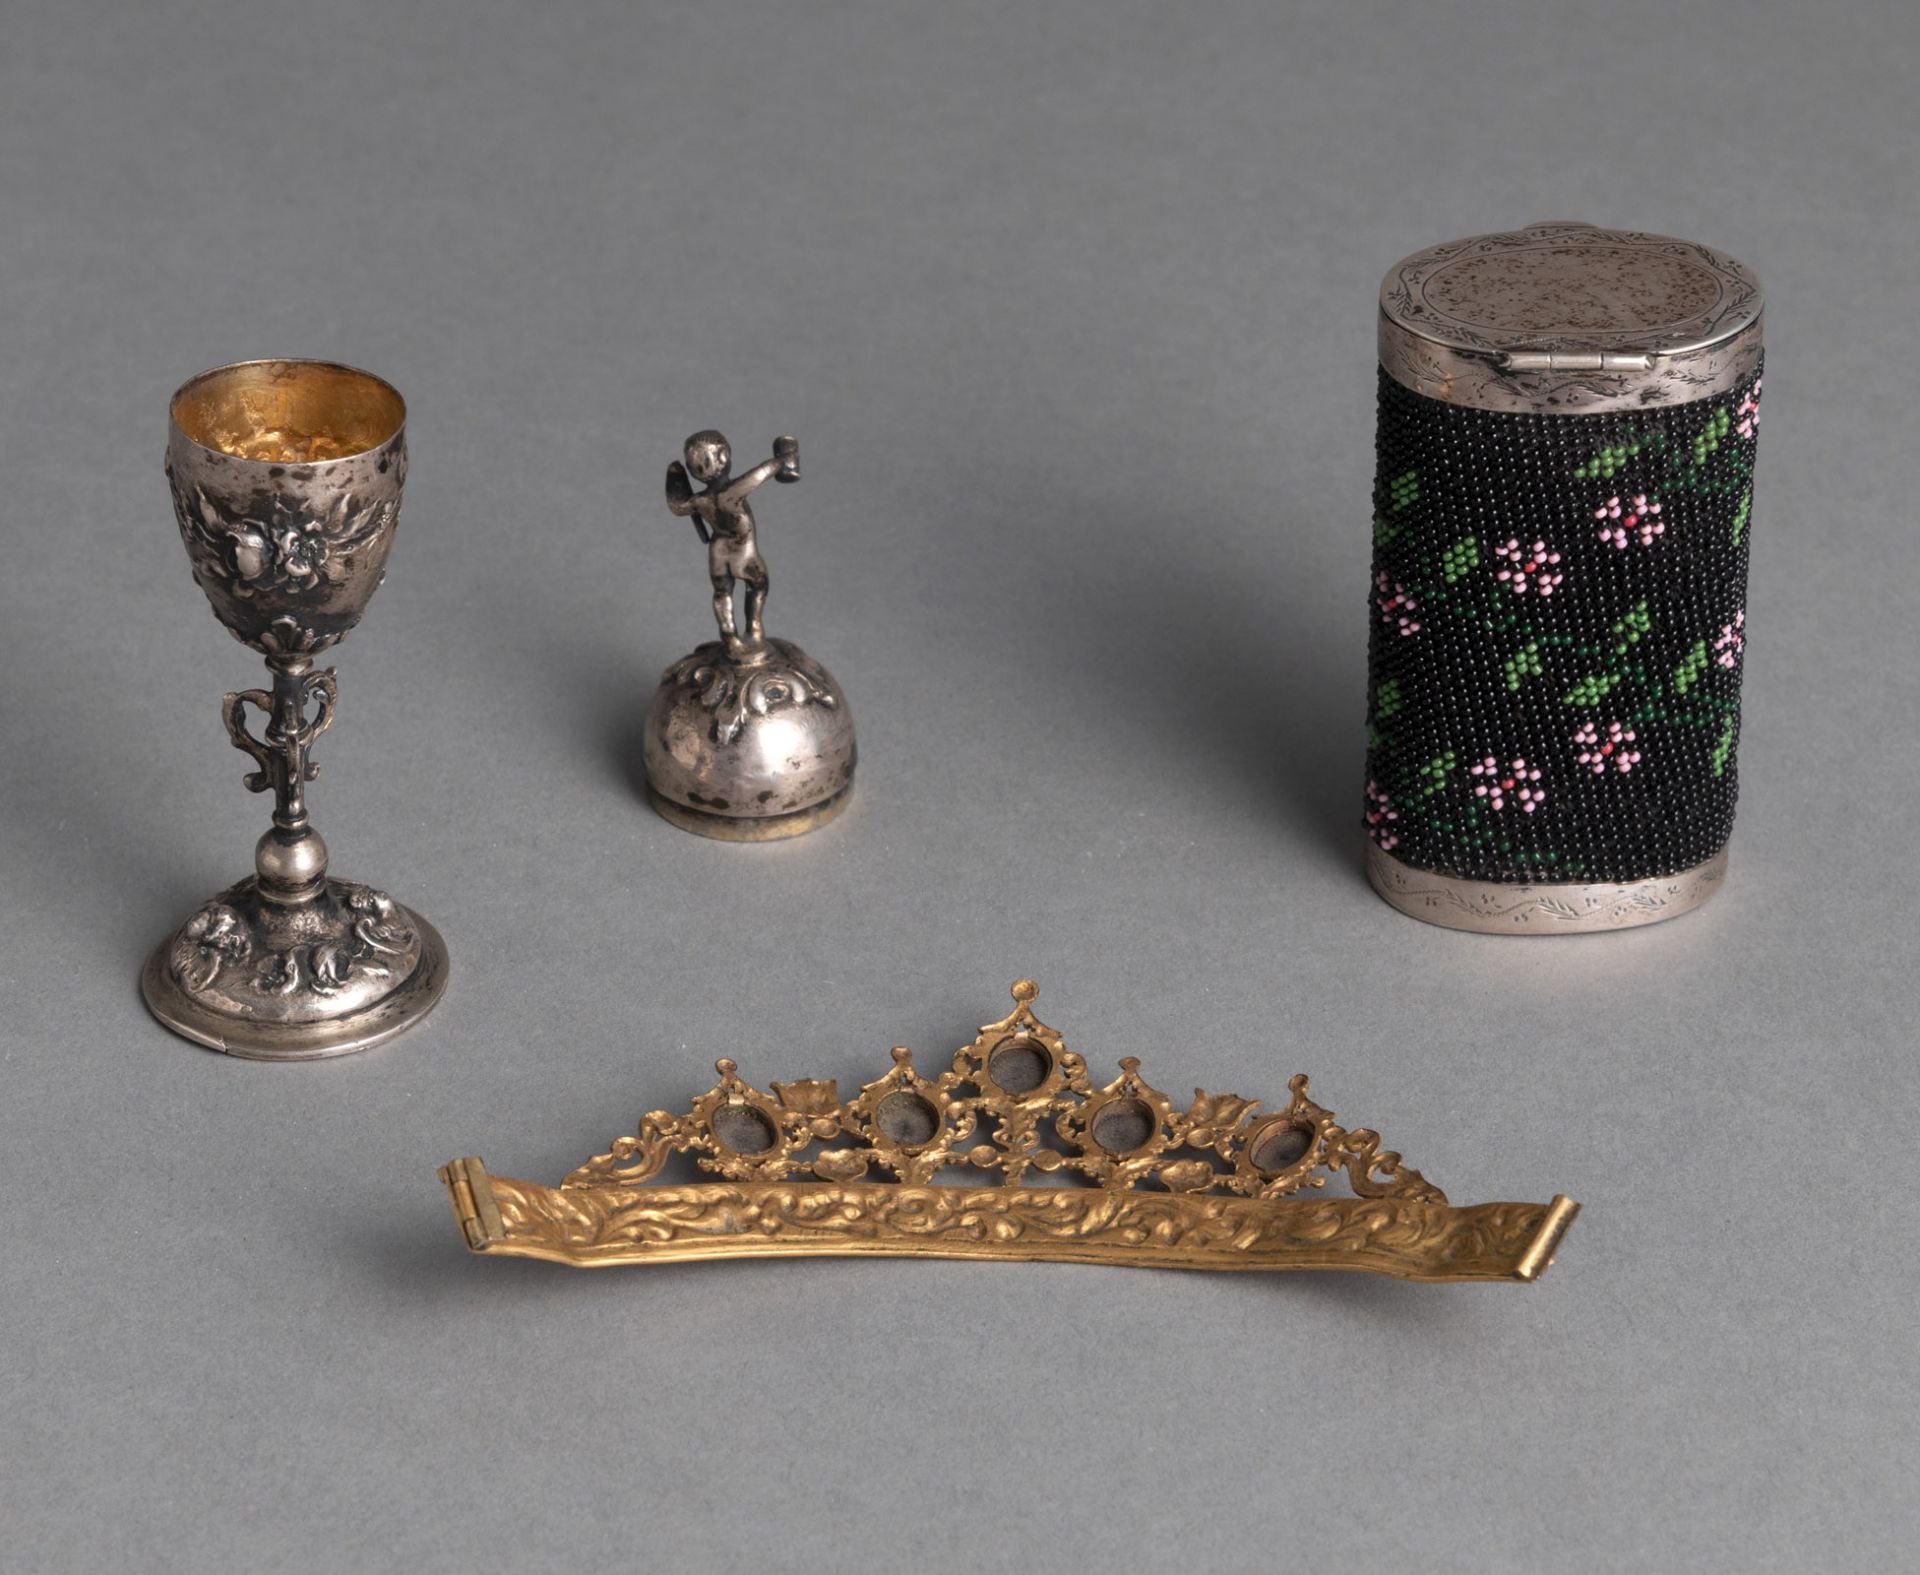 A TIARA, A MINIATURE CUP AND A SMALL CASE - Image 3 of 5